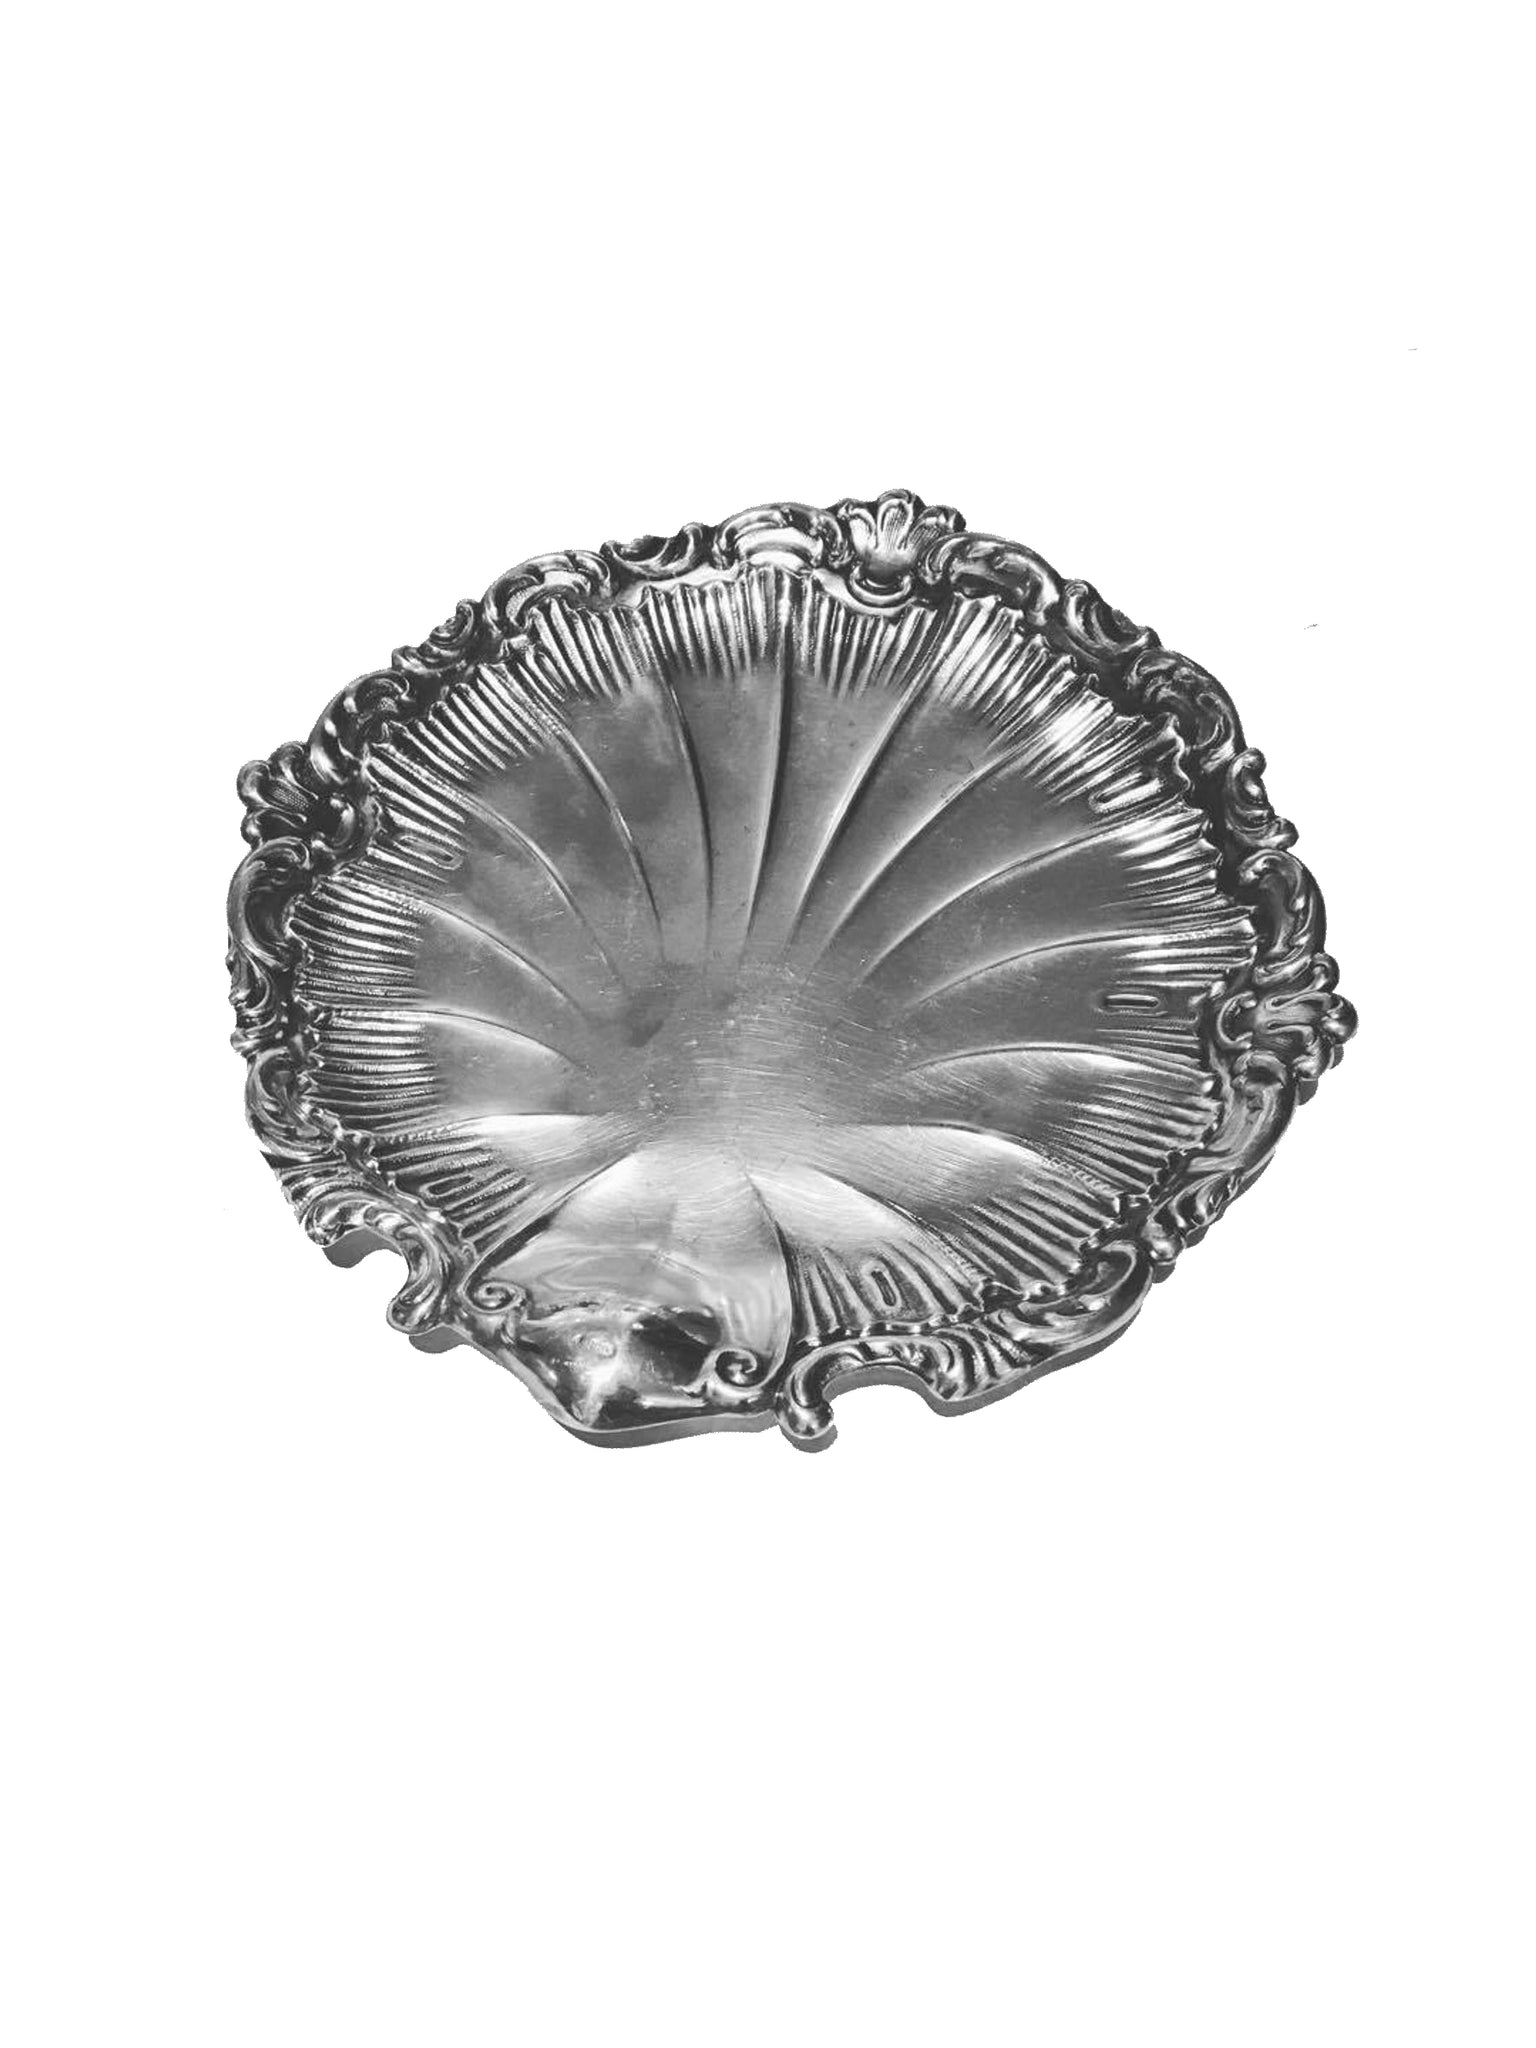 1930s English Silver Plate Shell Plate Weston Table